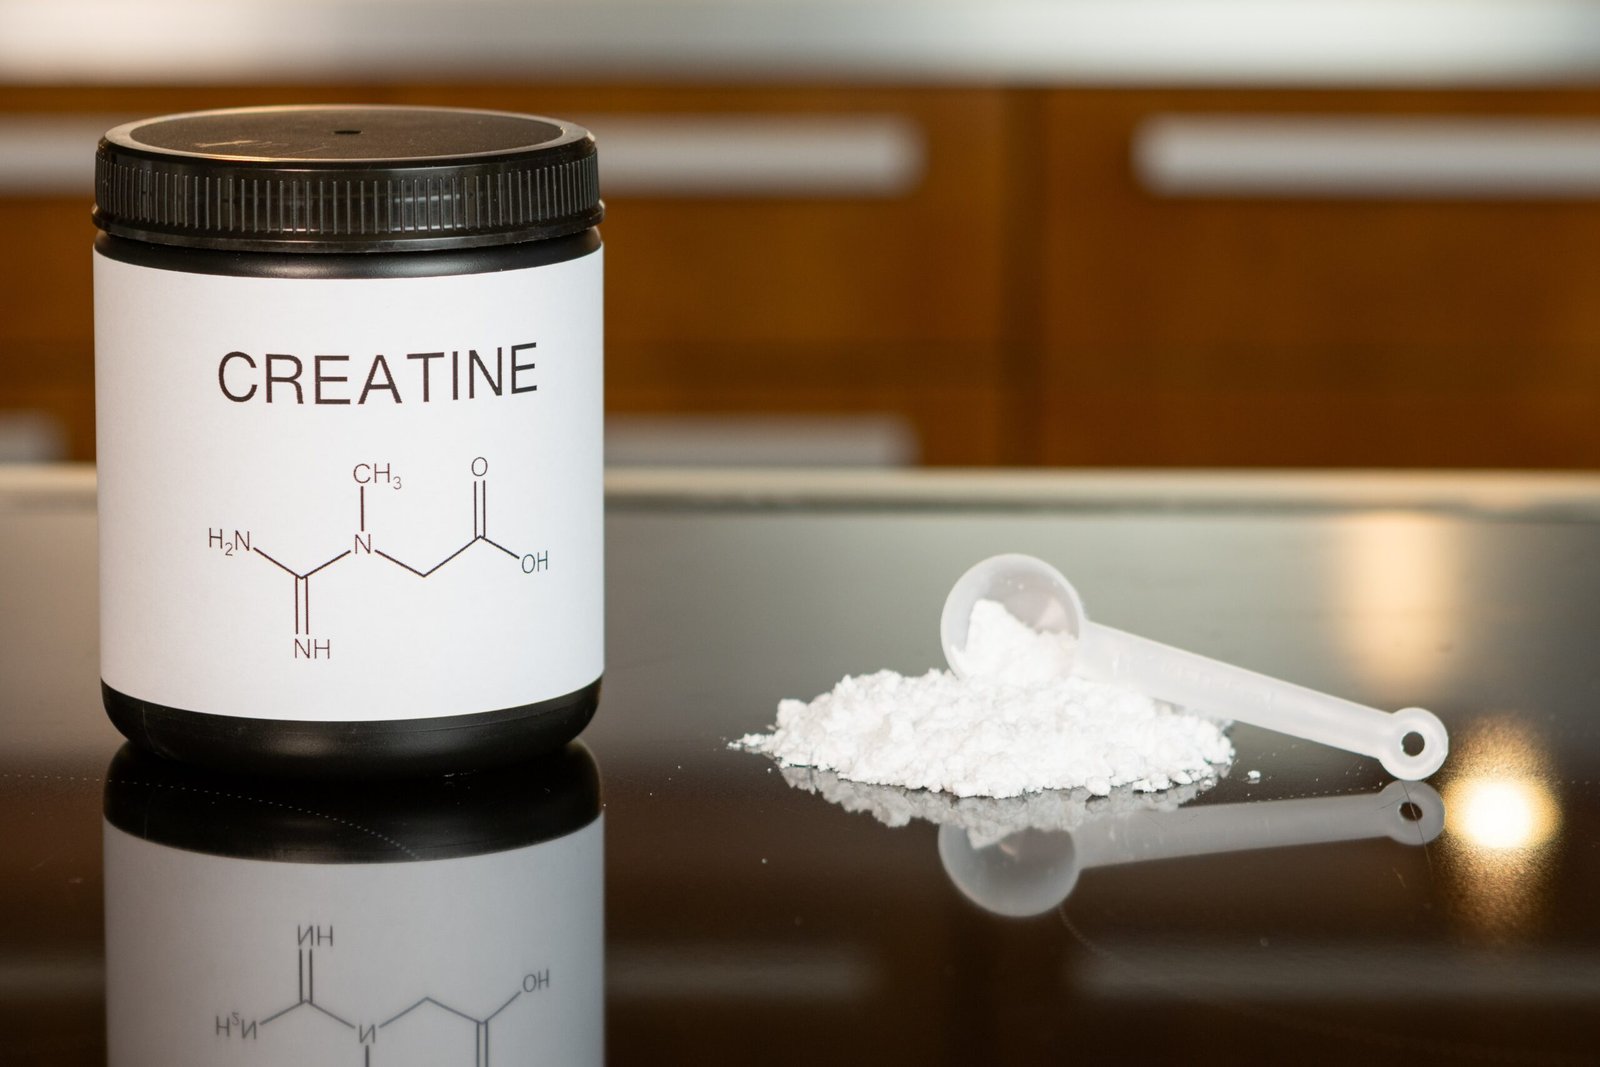 a bottle of creatine next to a spoon on a table